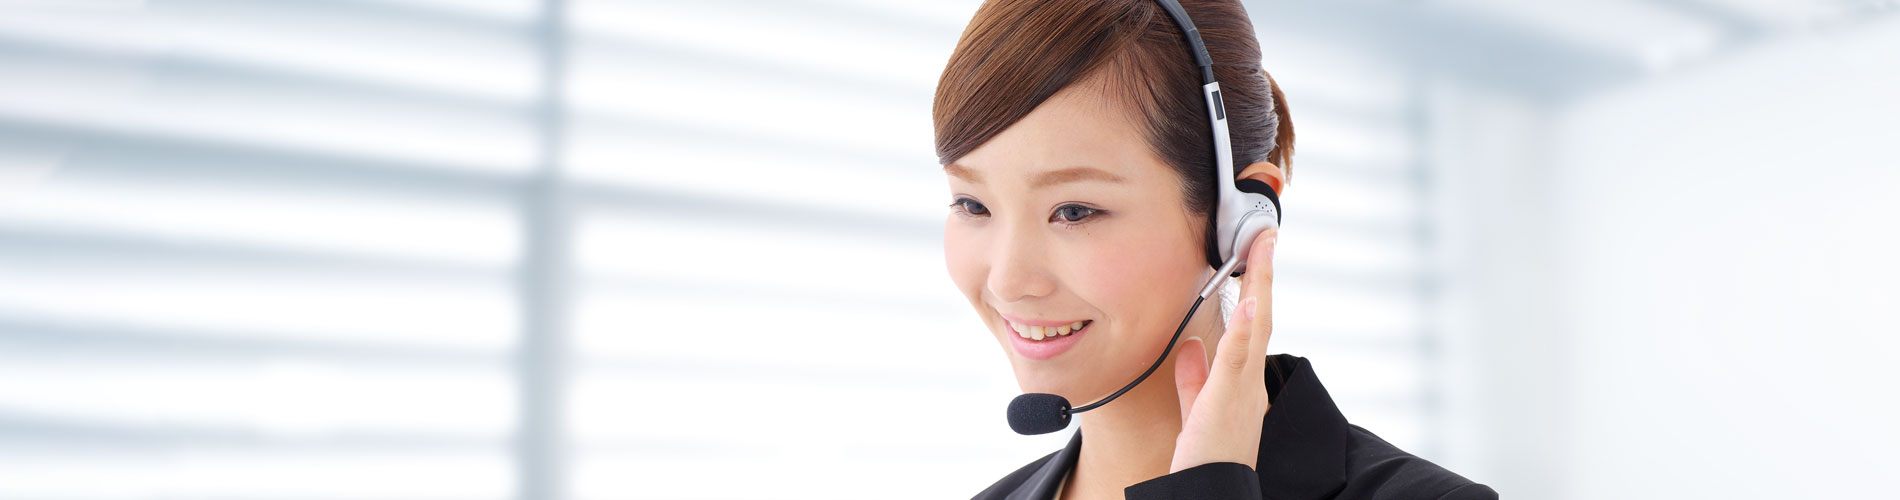 callcenter, business call, support, technical support, headset, female operator